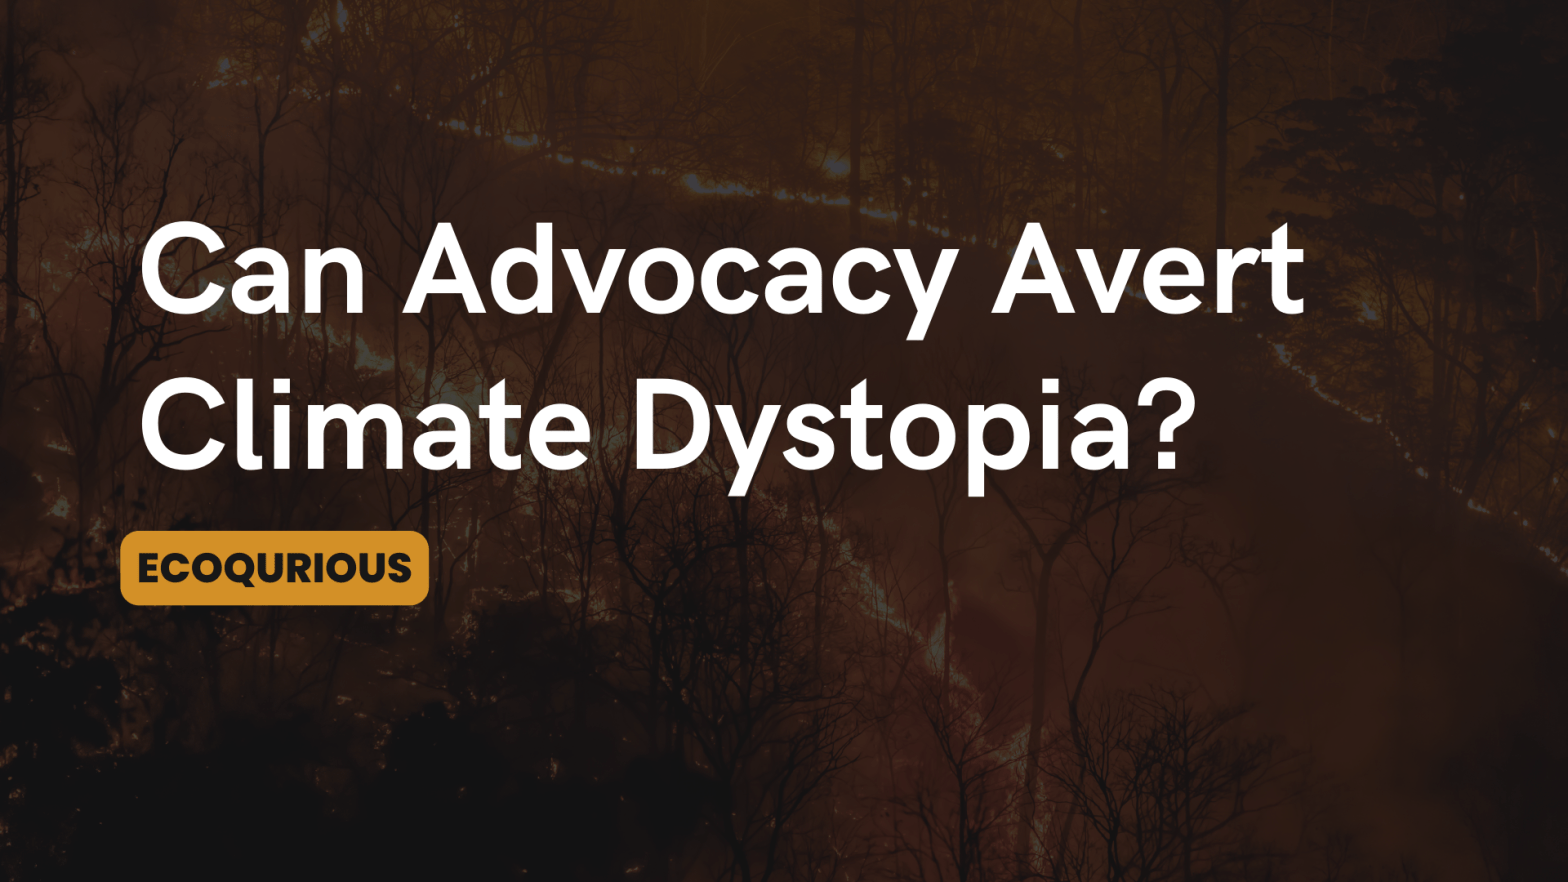 Can Advocacy Avert Climate Dystopia?